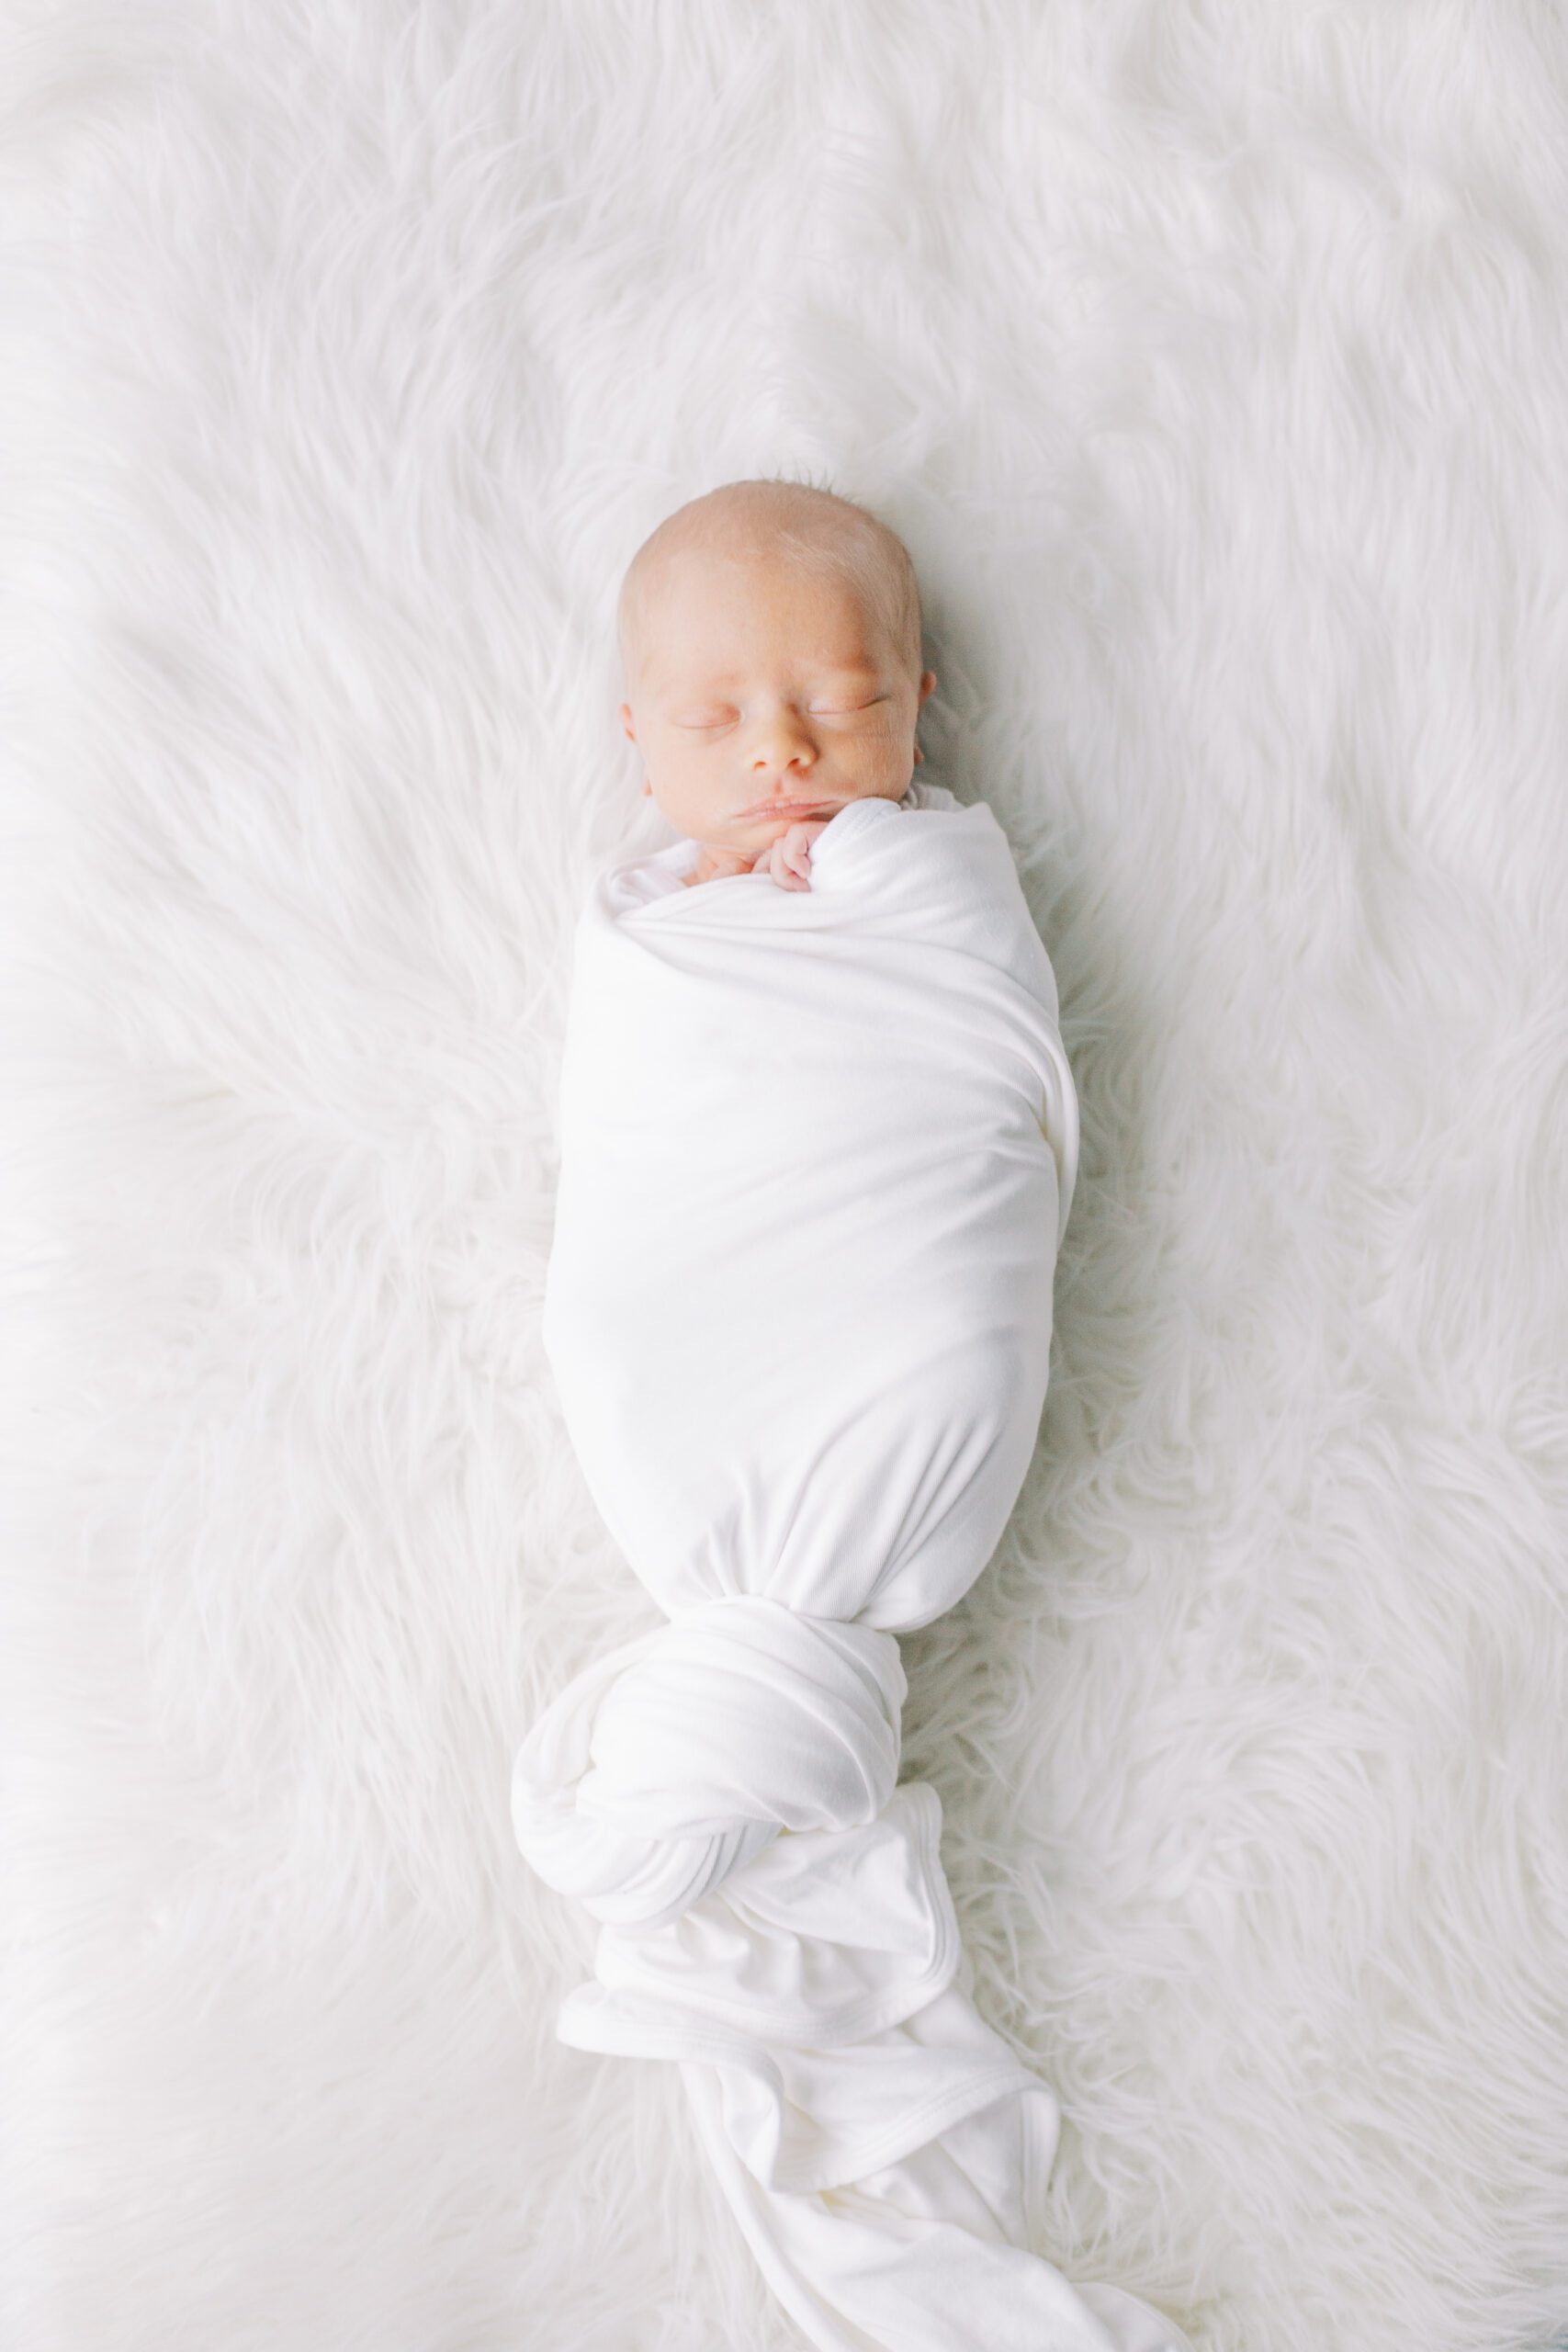 Newborn baby wrapped in white swaddle blanket on white fur background in Two Favorite Companies for Baby Items